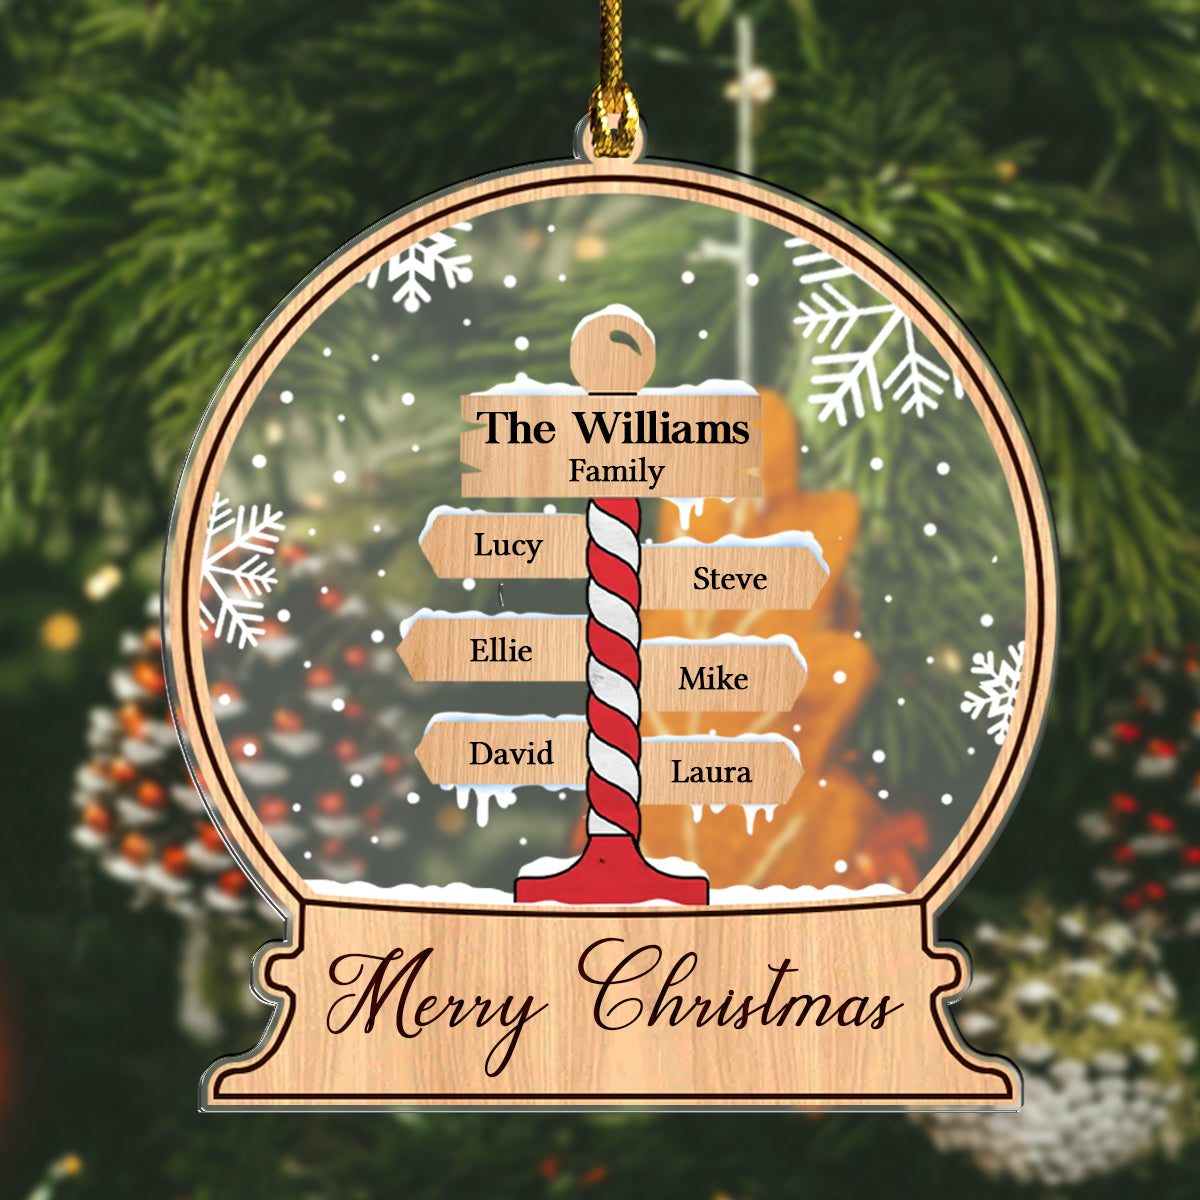 Merry Christmas Family Name - Personalized Ornament - Christmas Gift For Family